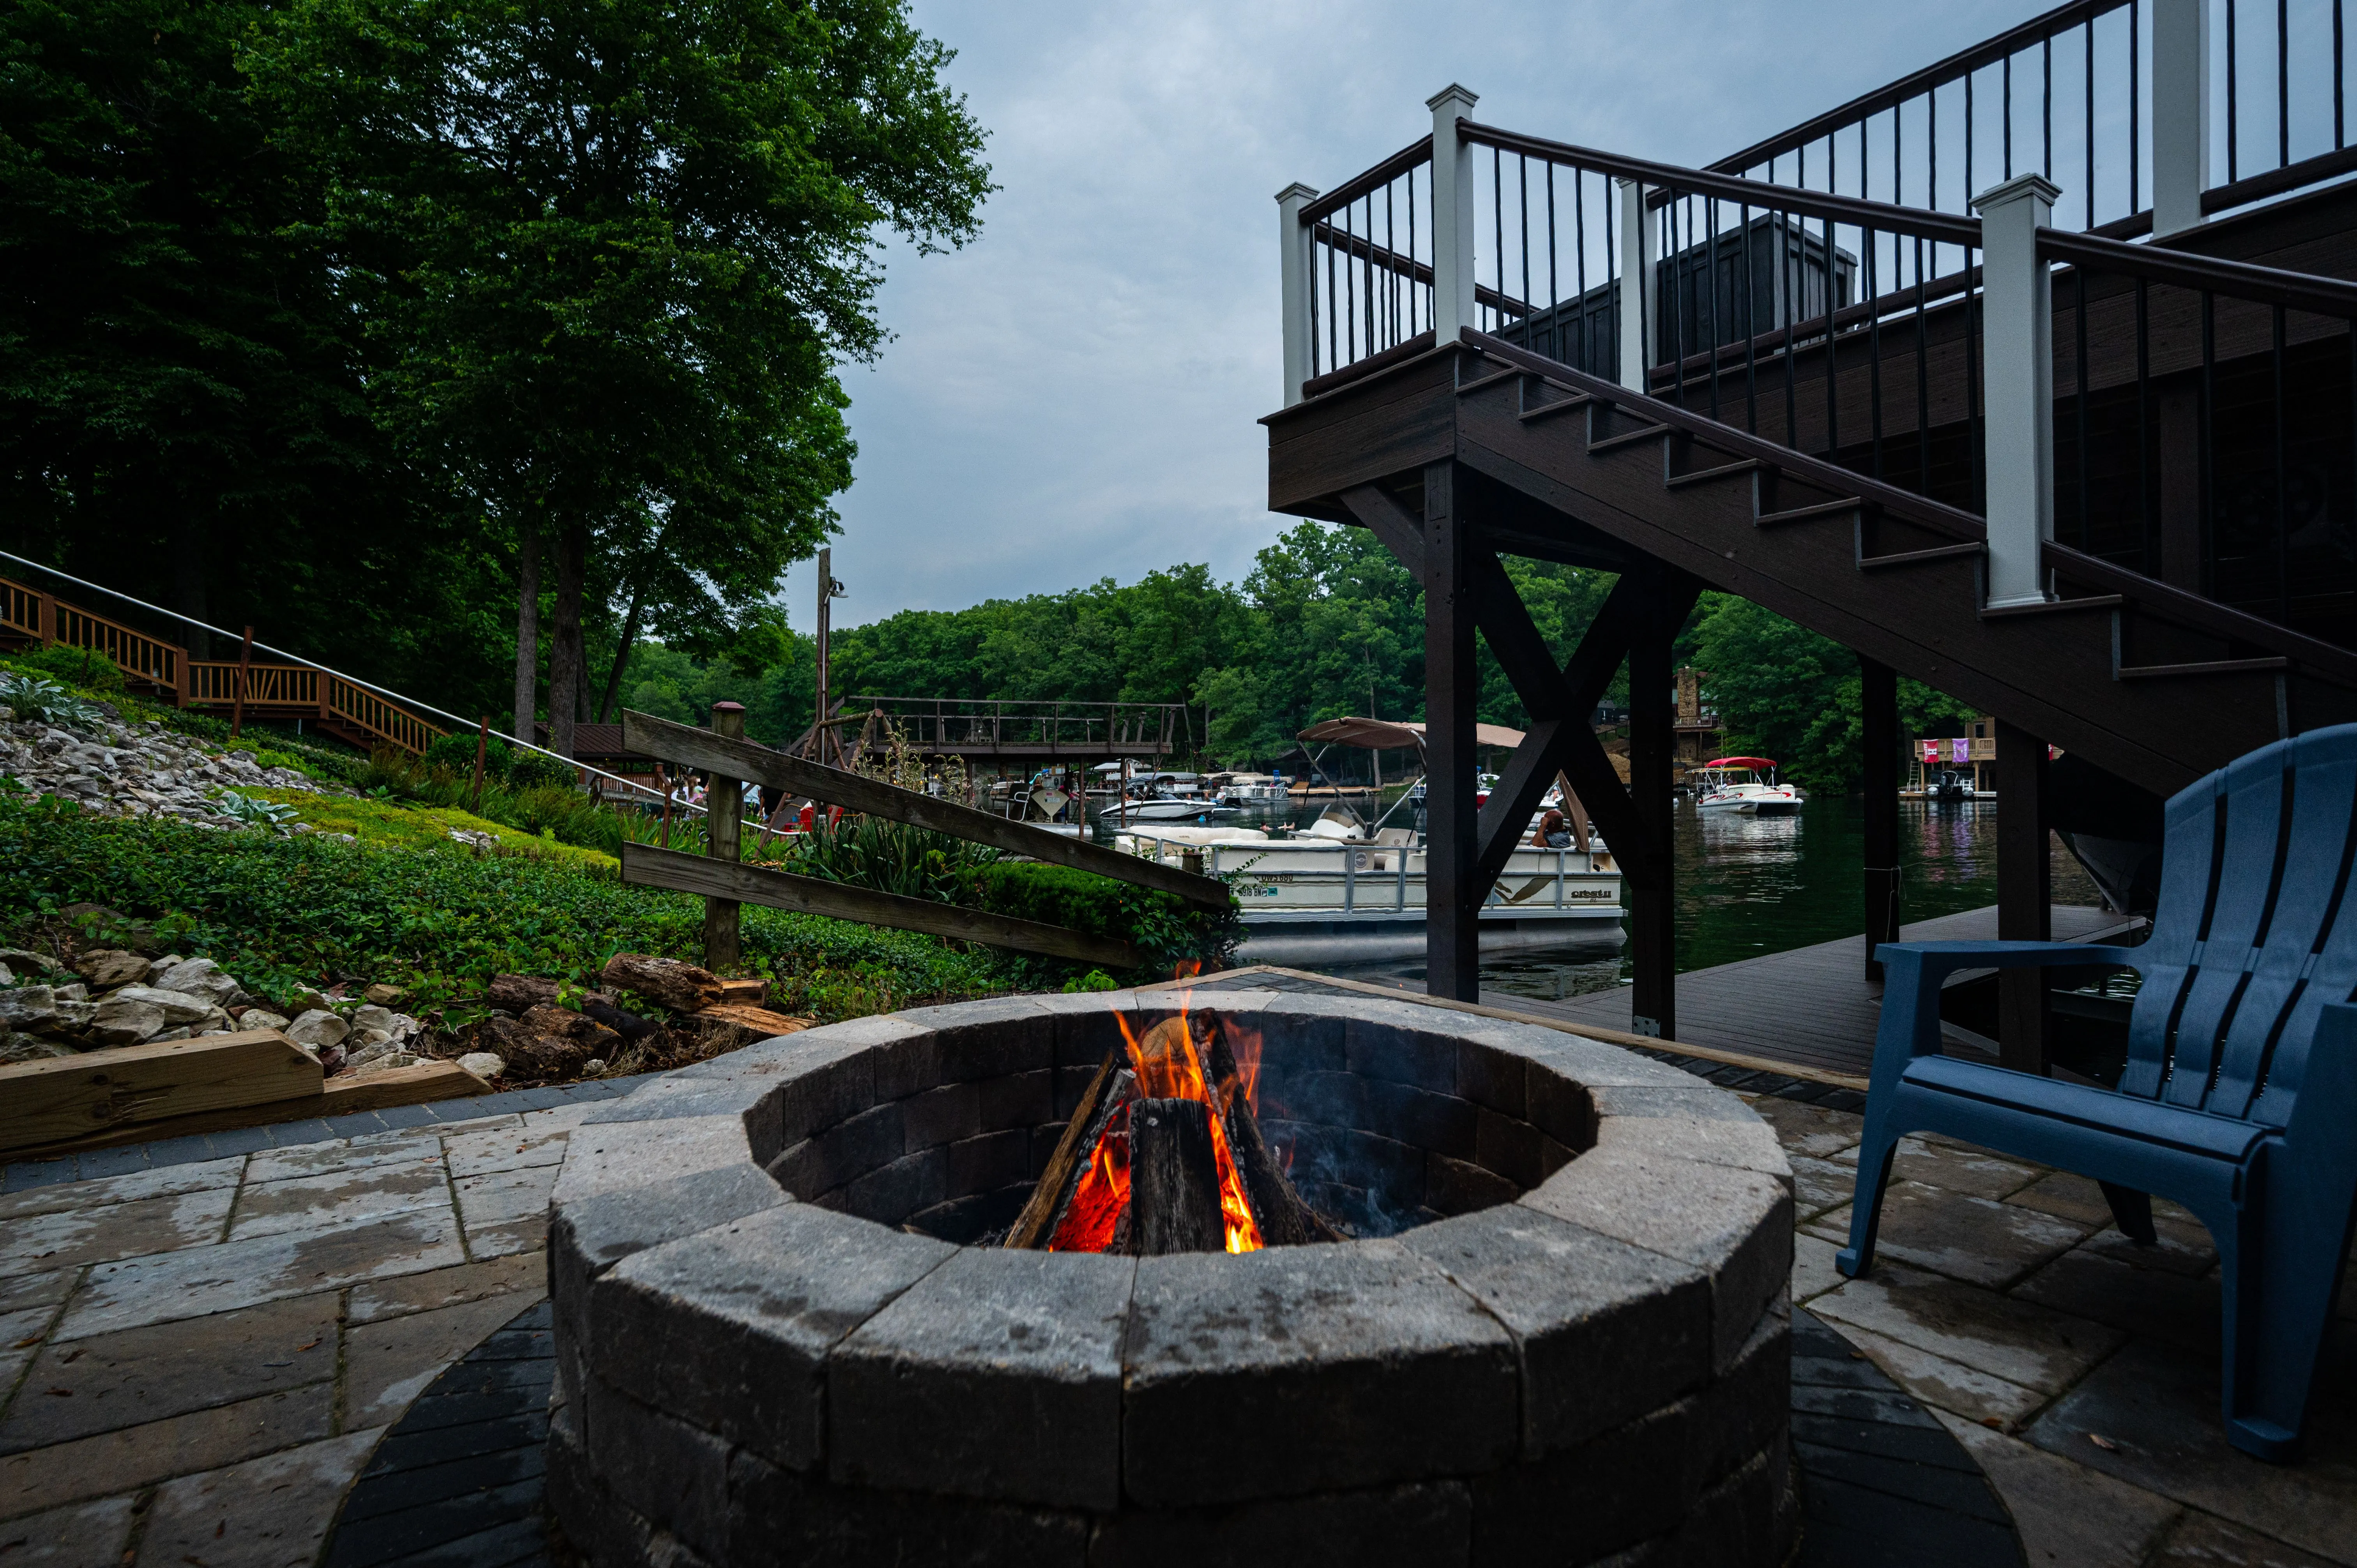 An outdoor stone fire pit with a lit fire, surrounded by seating, with stairs and lush greenery in the background.